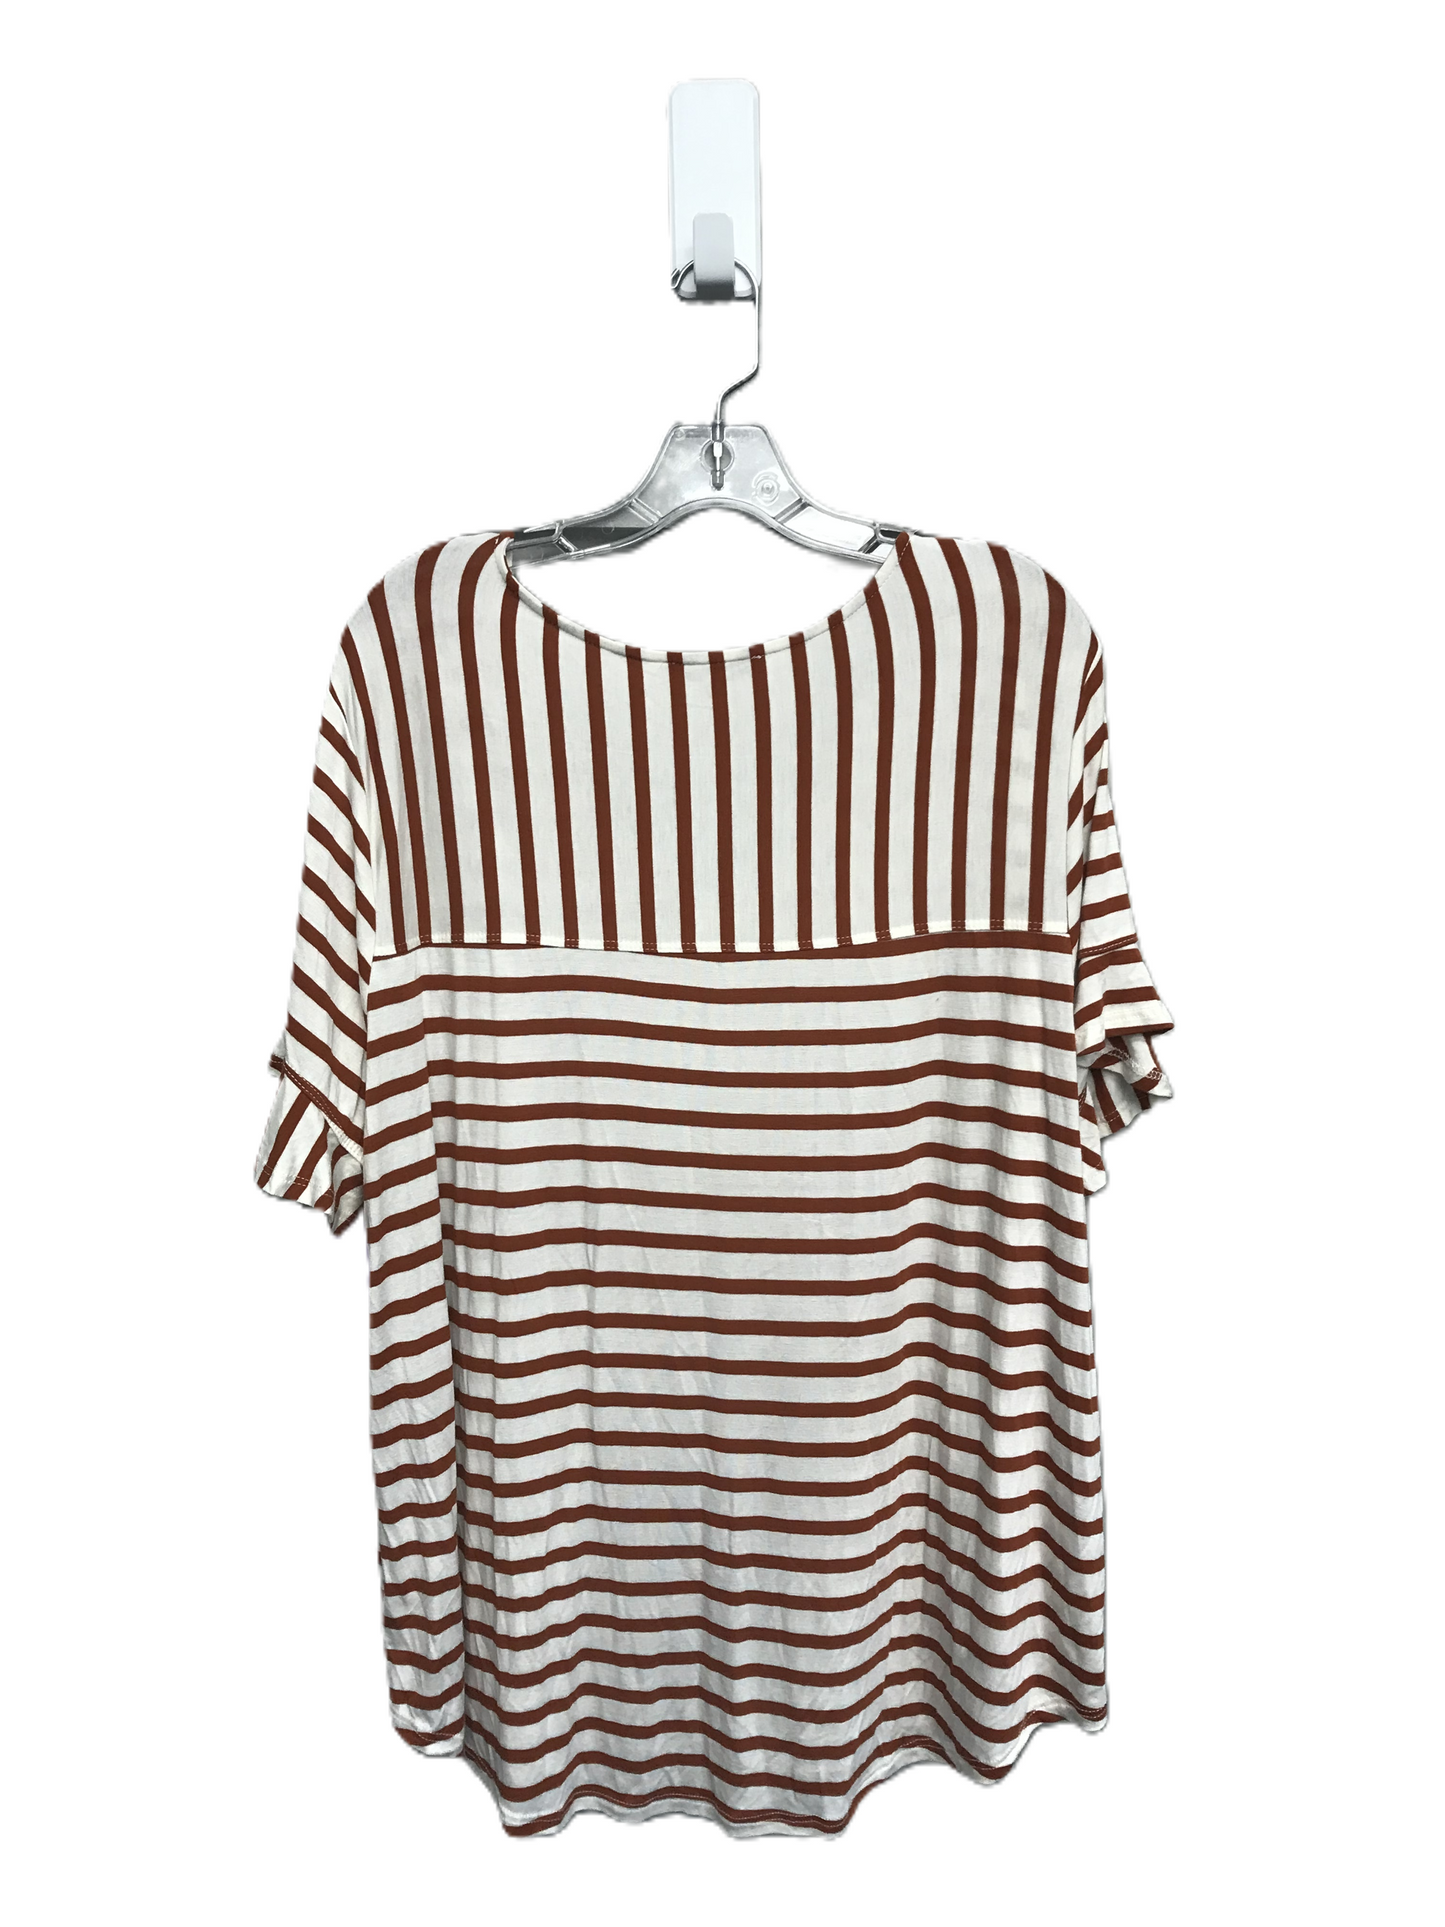 Striped Pattern Top Short Sleeve By Green Envelope, Size: 2x